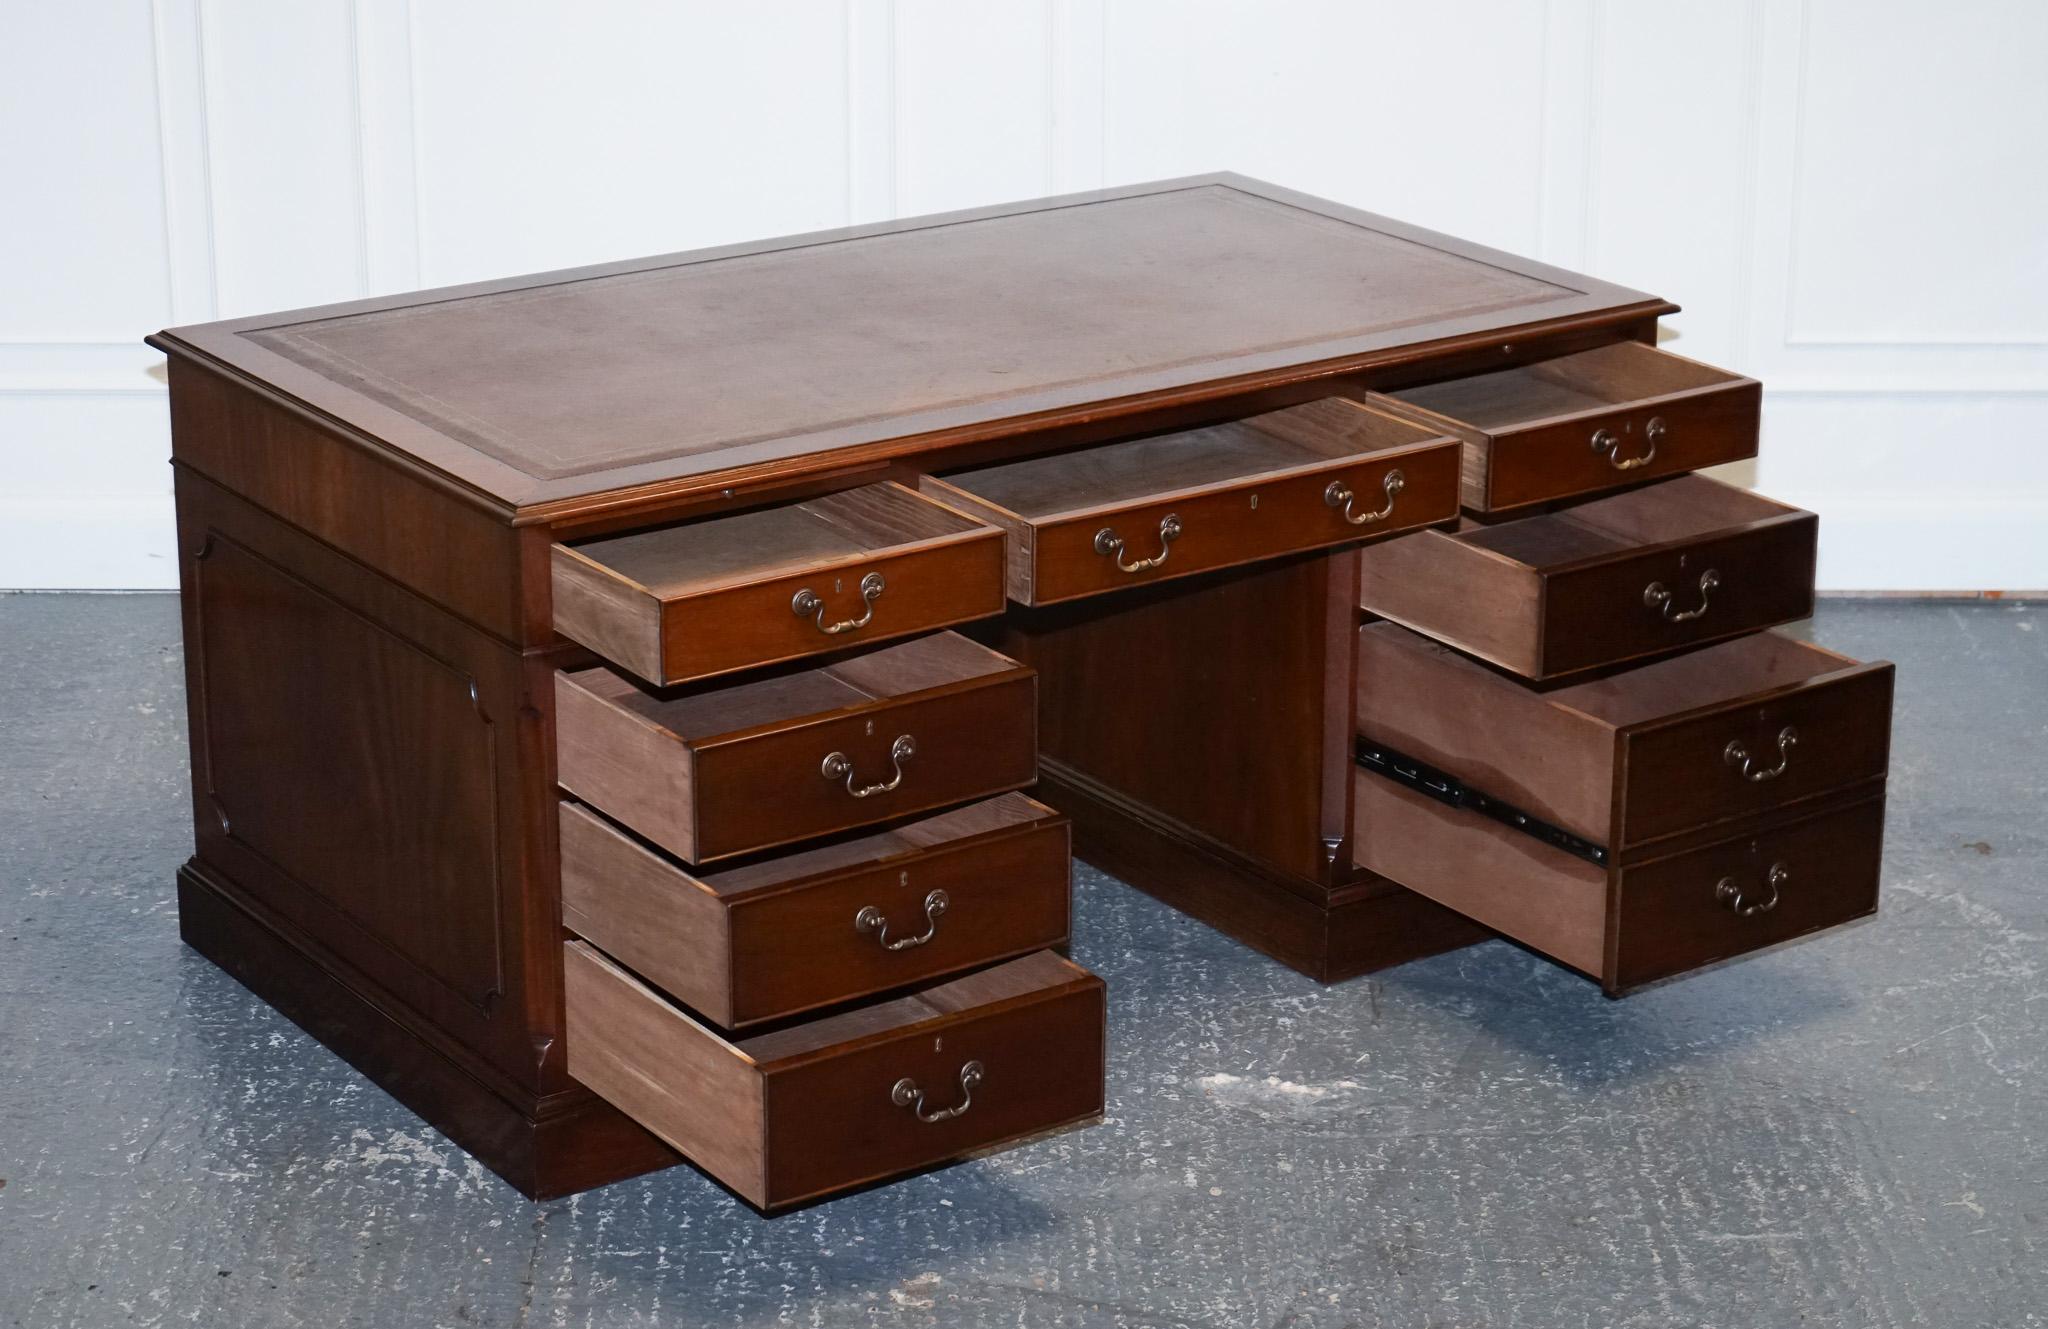 British STUNNING LARGE TWiN PEDESTAL DESK BROWN LEATHER TOP SLIDING OUT TRAYS 8 DRAWERS For Sale